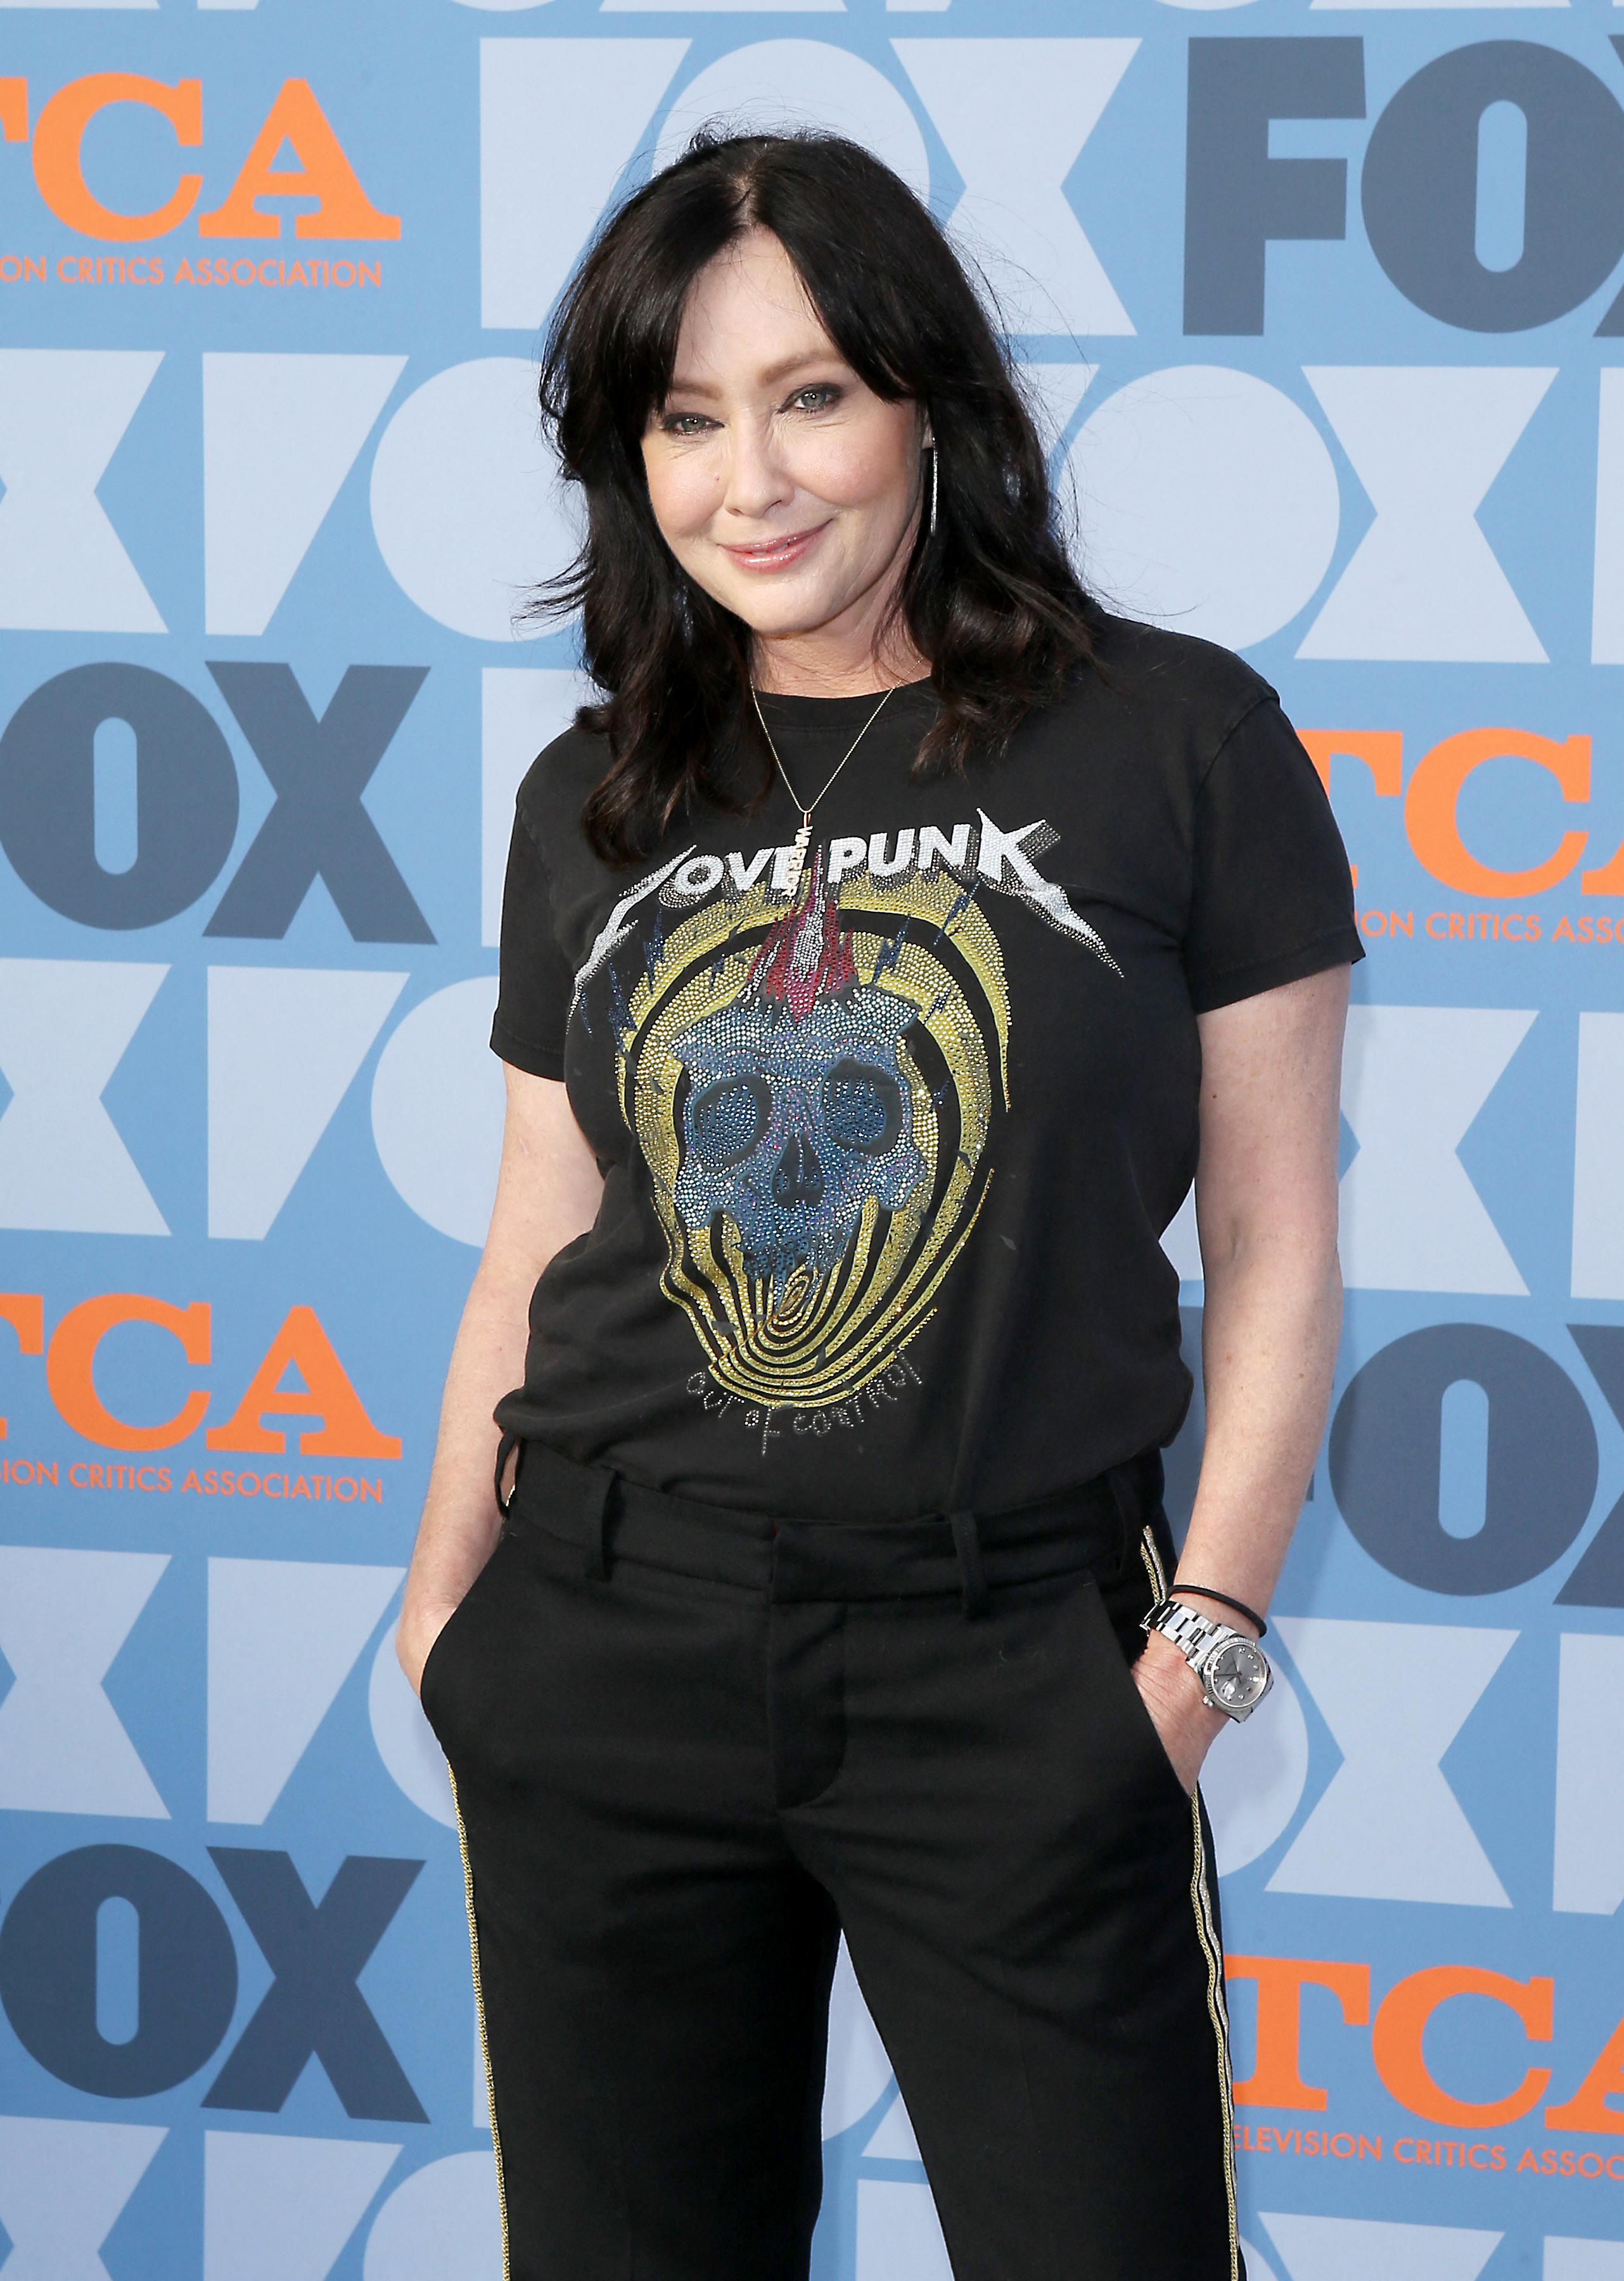 Shannen Doherty was a small screen icon and starred on groundbreaking programs such as Beverly Hills 90210, Charmed and Little House on the Prairie